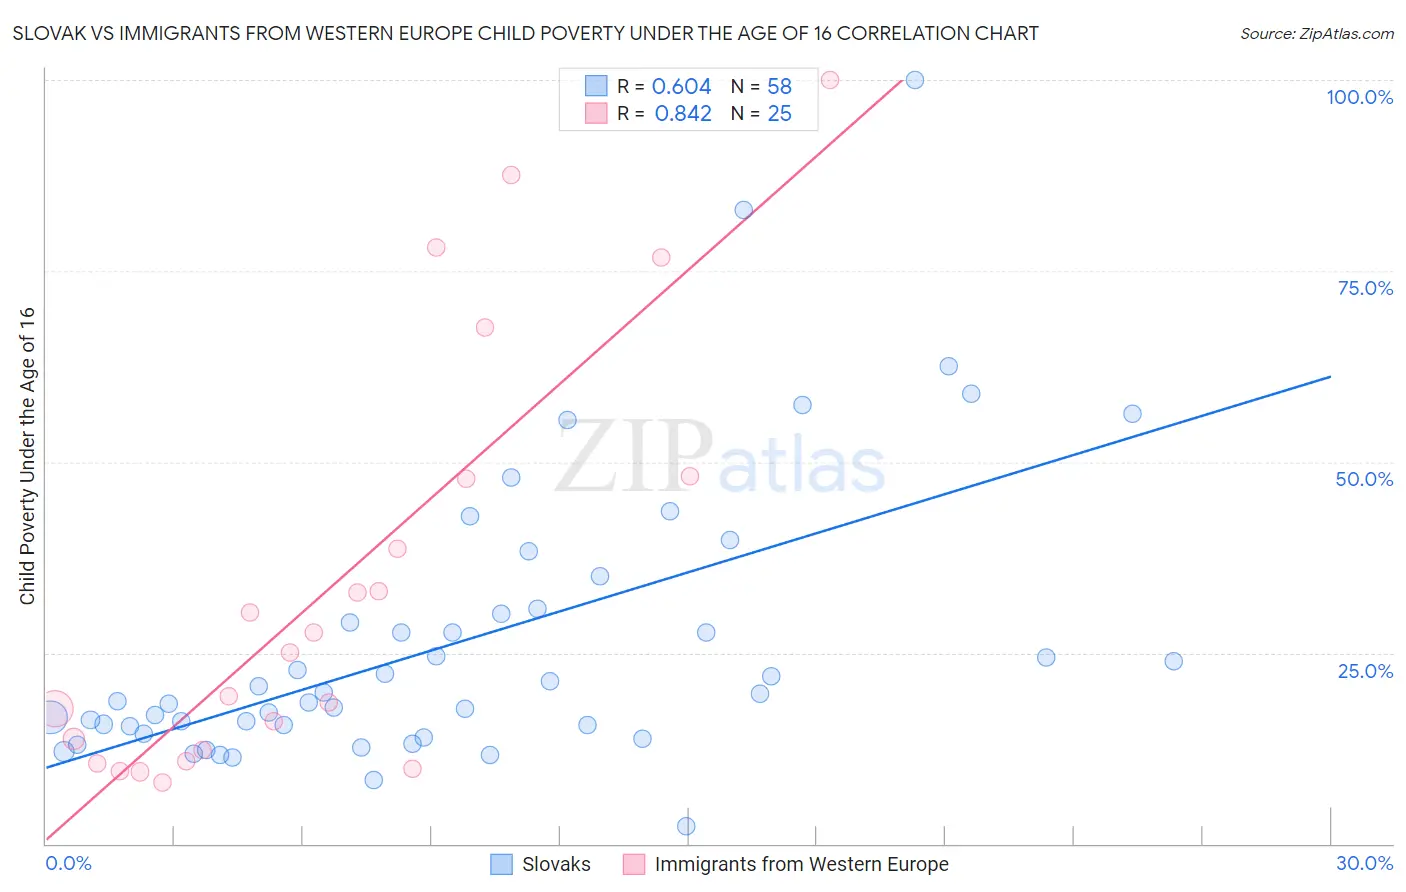 Slovak vs Immigrants from Western Europe Child Poverty Under the Age of 16